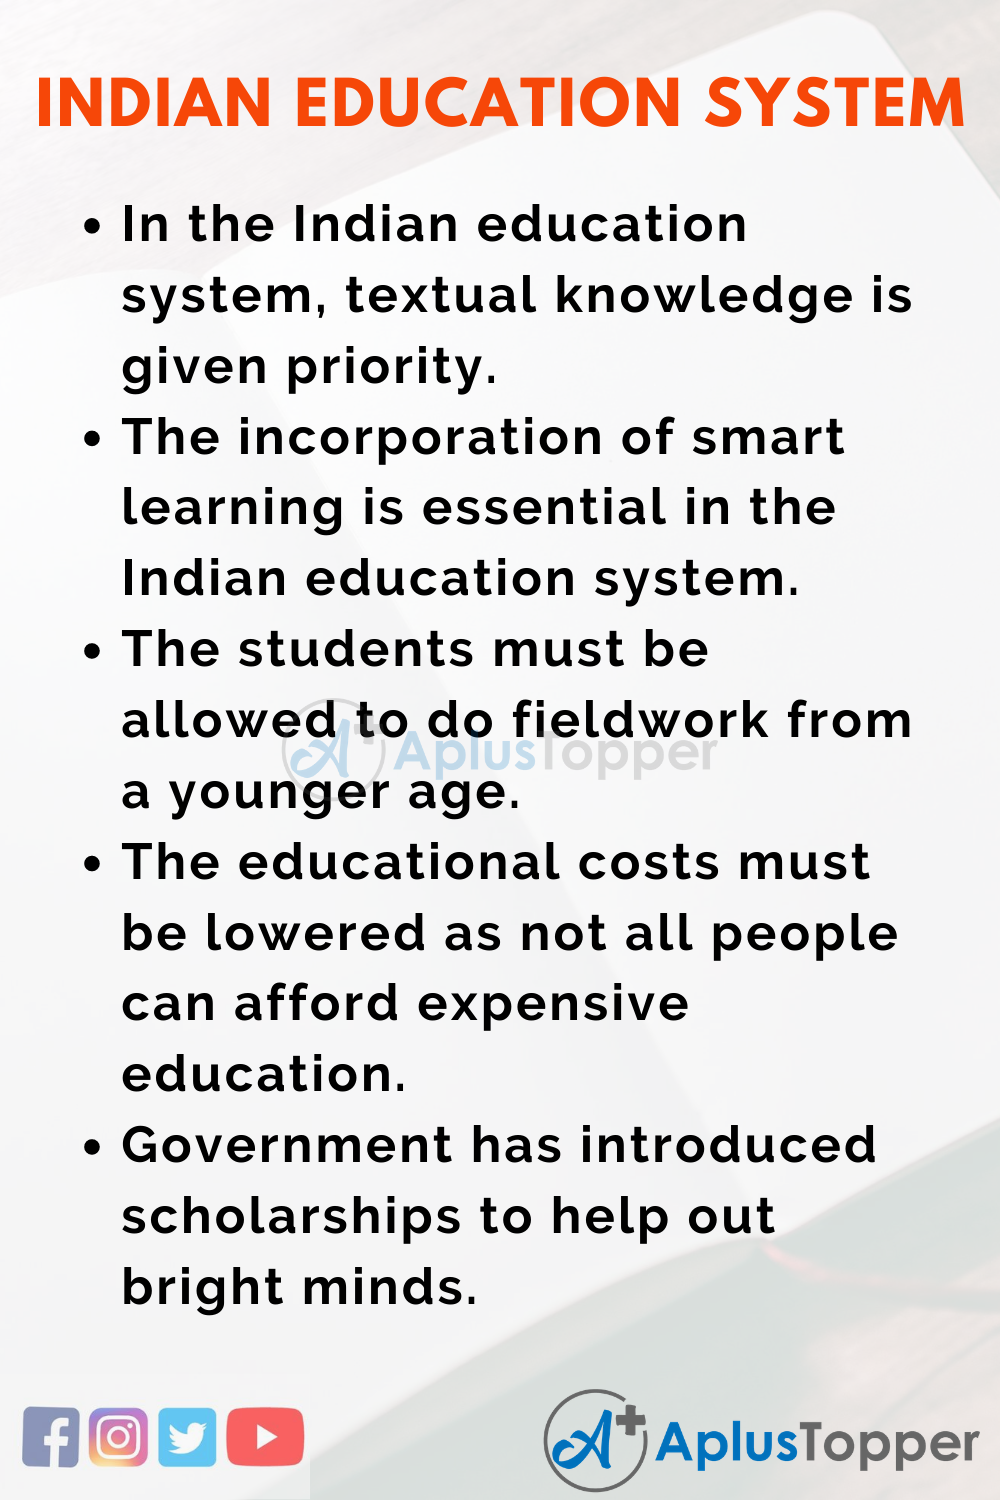 changes in education system in india